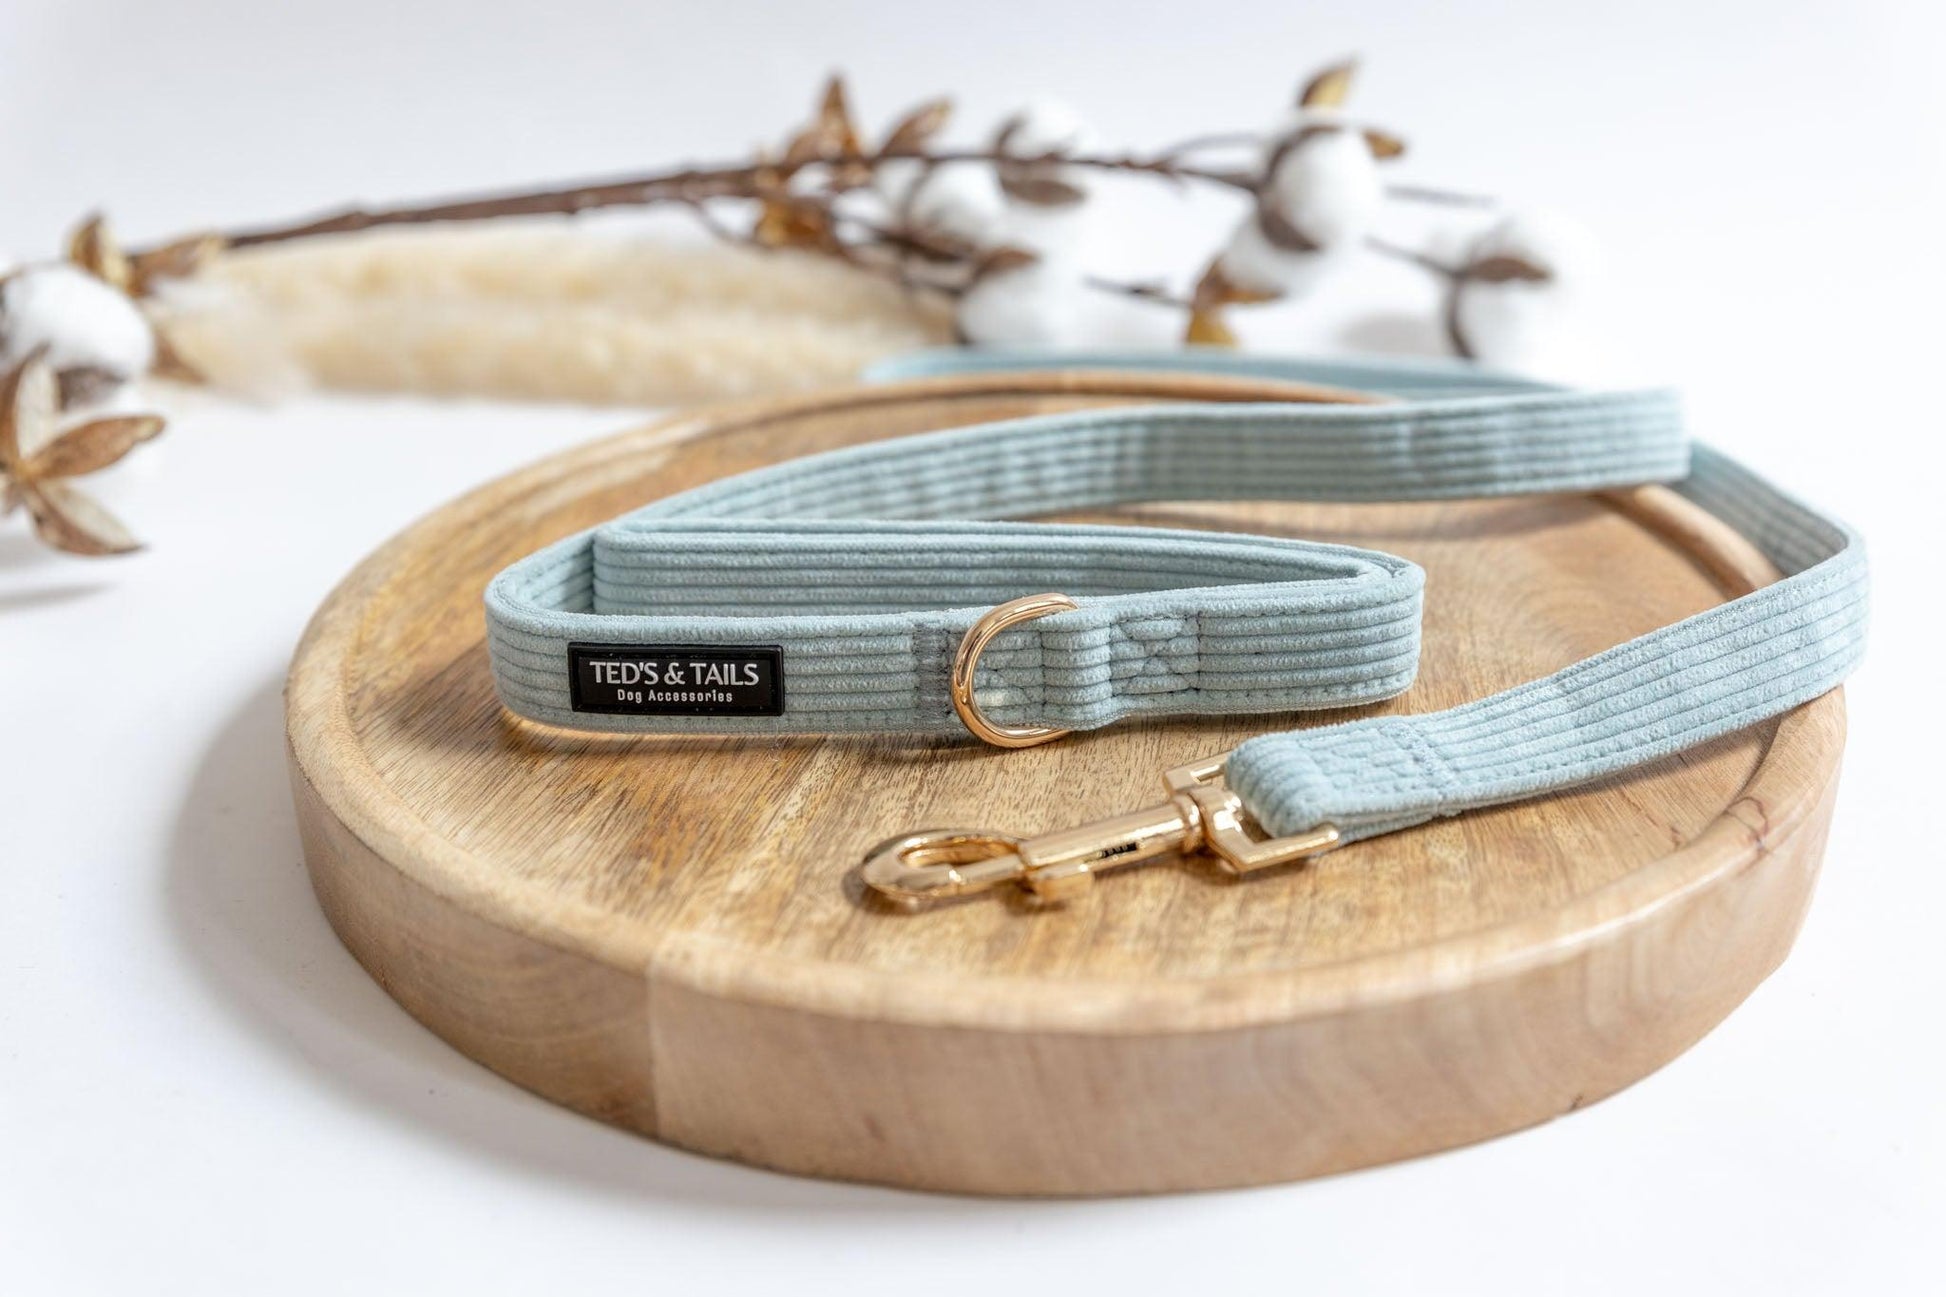 Riem - Minty may - Ted's and Tails - boetiek, riem, teds and tails - By Marley